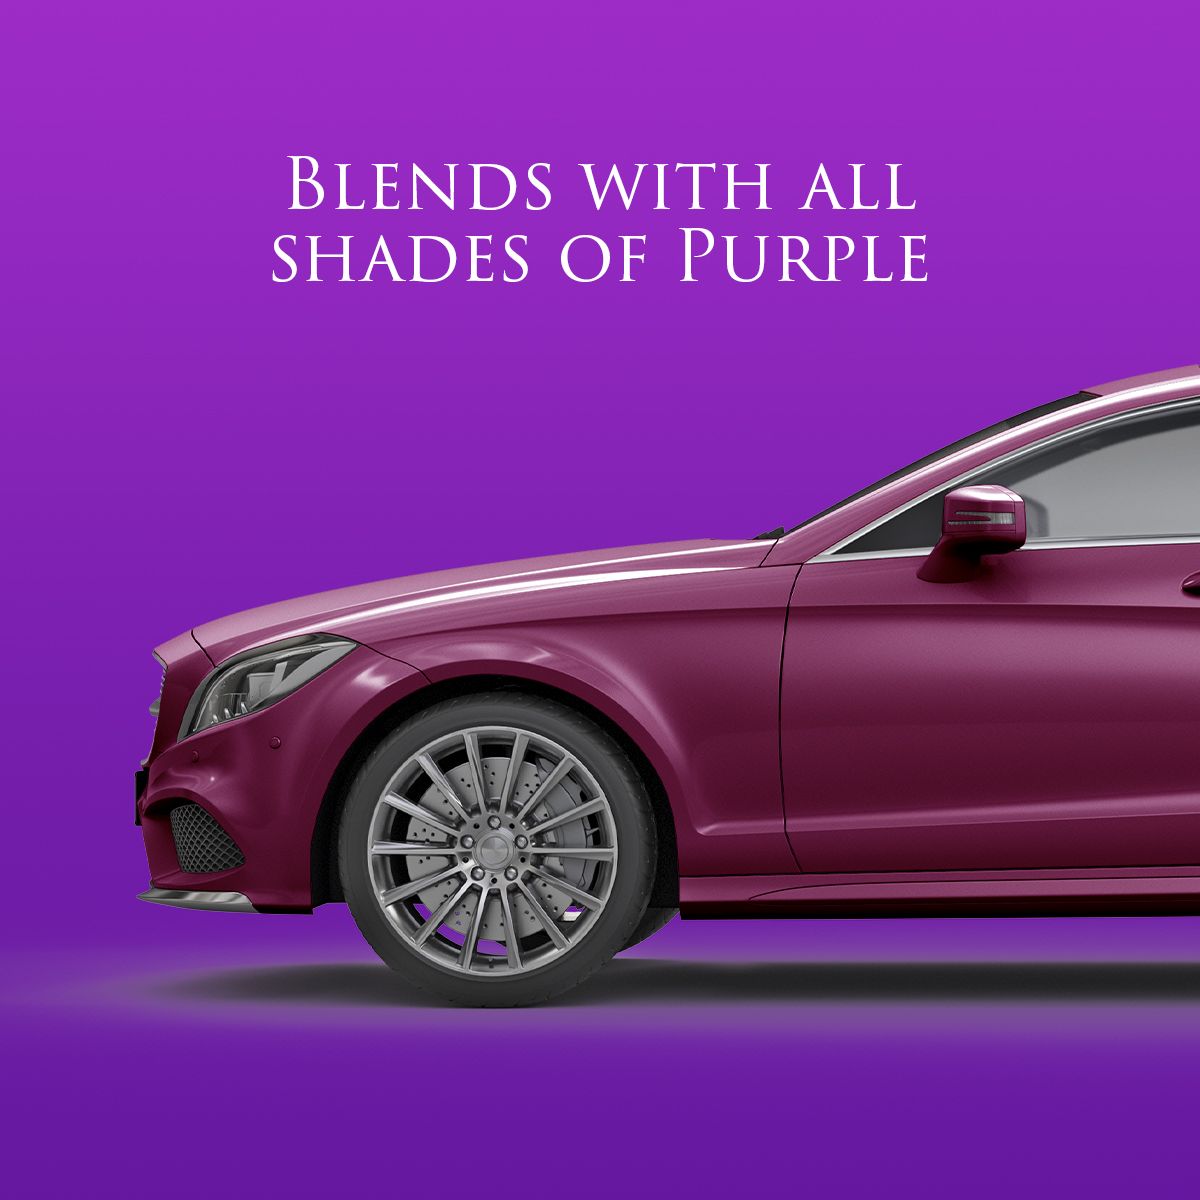 Blends with all shades of purple